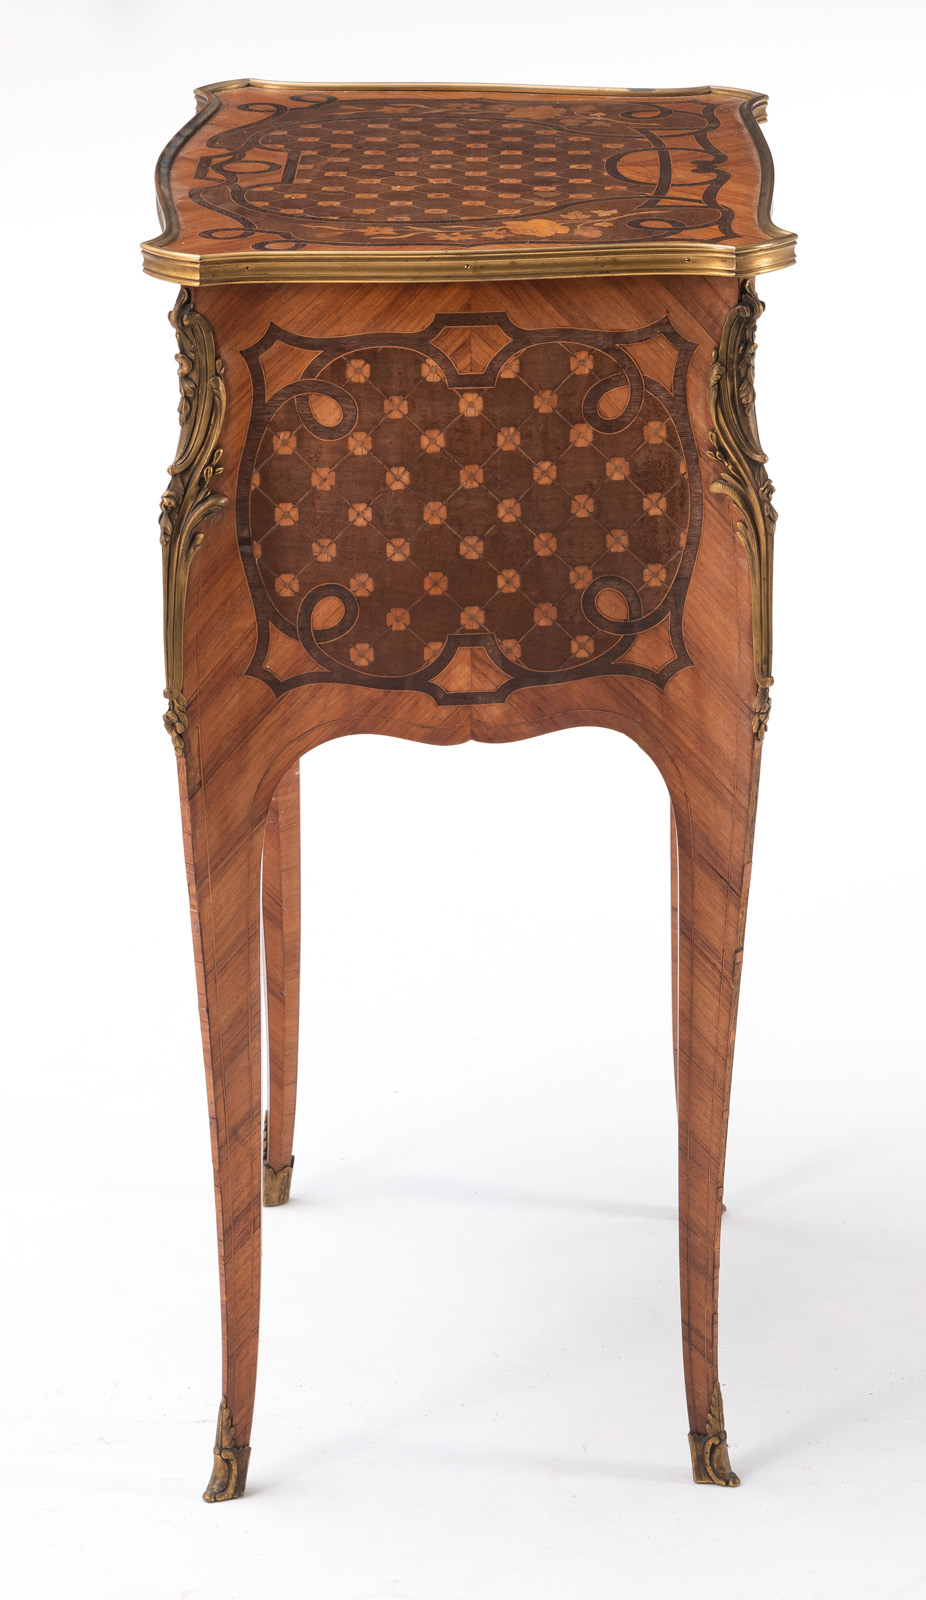 A LOUIS VI STYLE BRONZE MOUNTED PARTIAL EBONIZED KINGWOOD MARQUETRIED OCCASIONAL COMMODE - Image 6 of 7